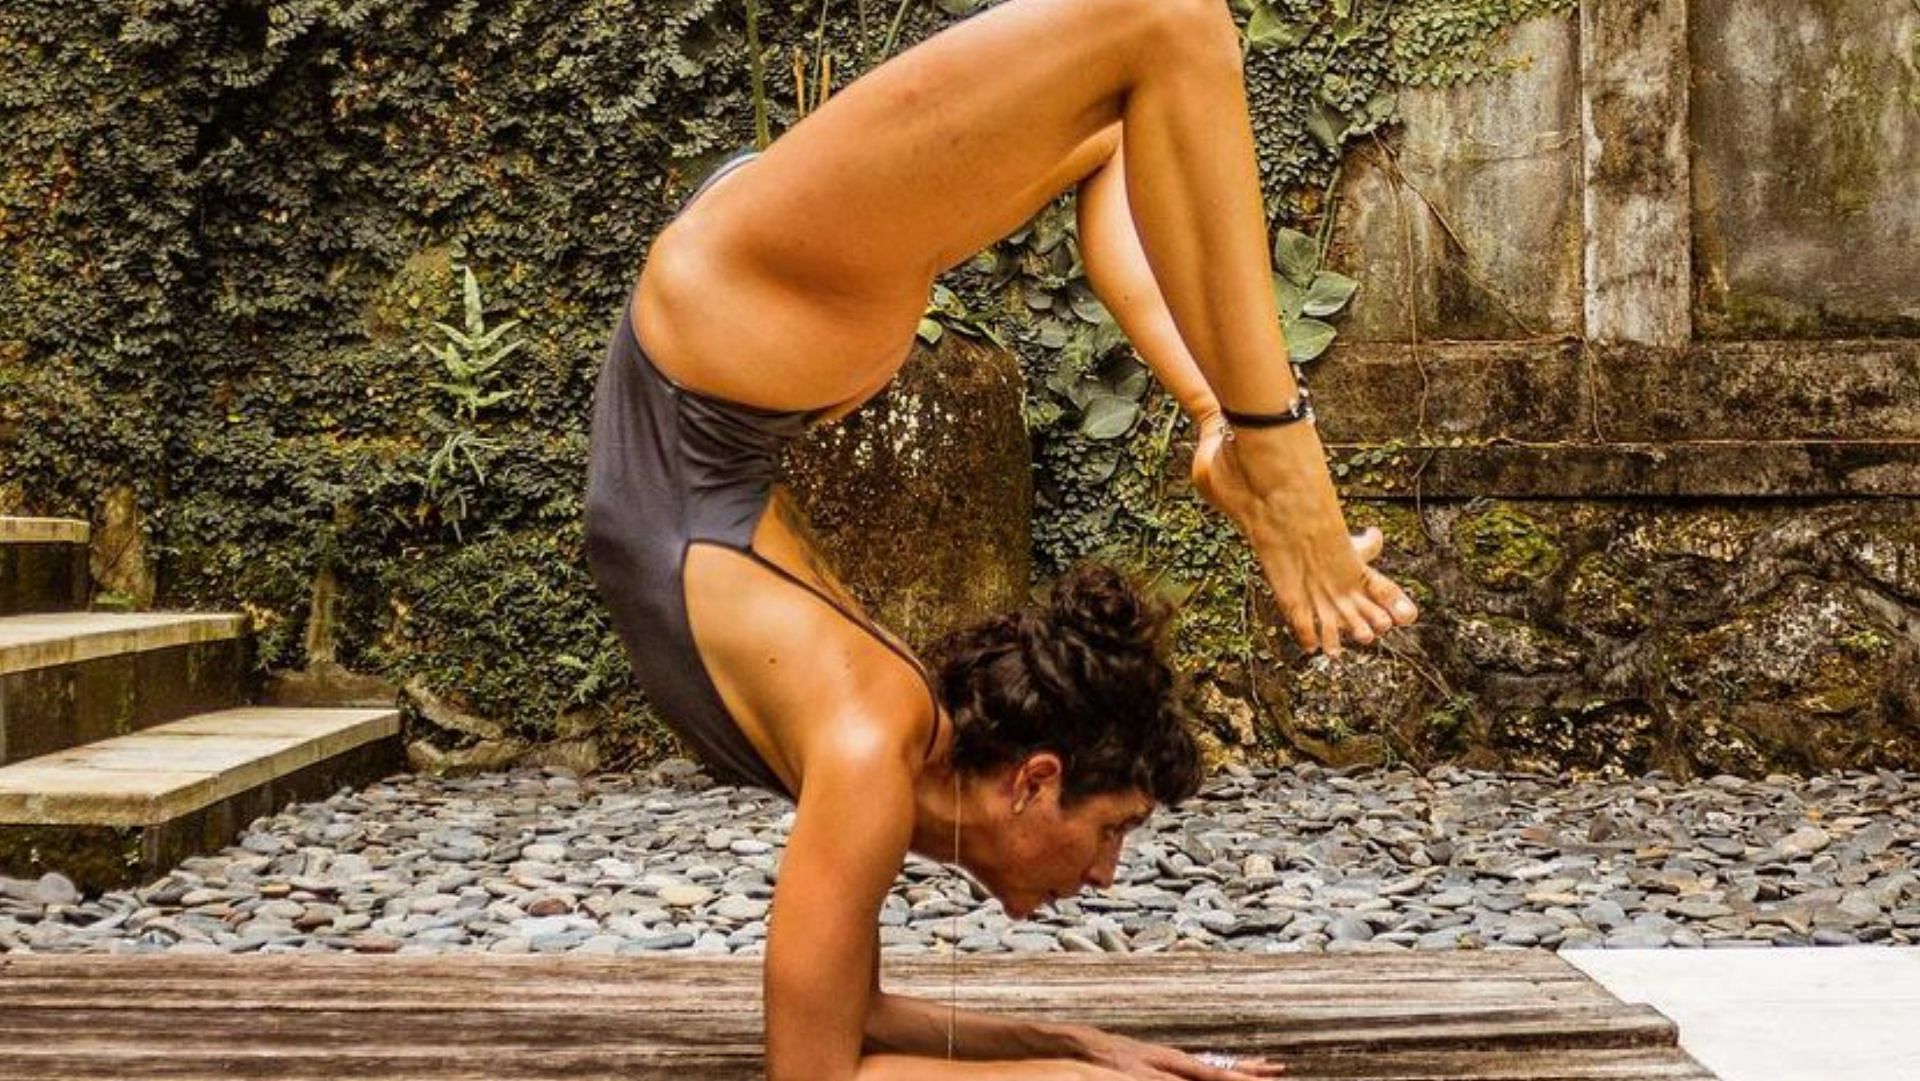 To perform the scorpion pose, build up your strength and balance. (Photo via Instagram/litasattva)